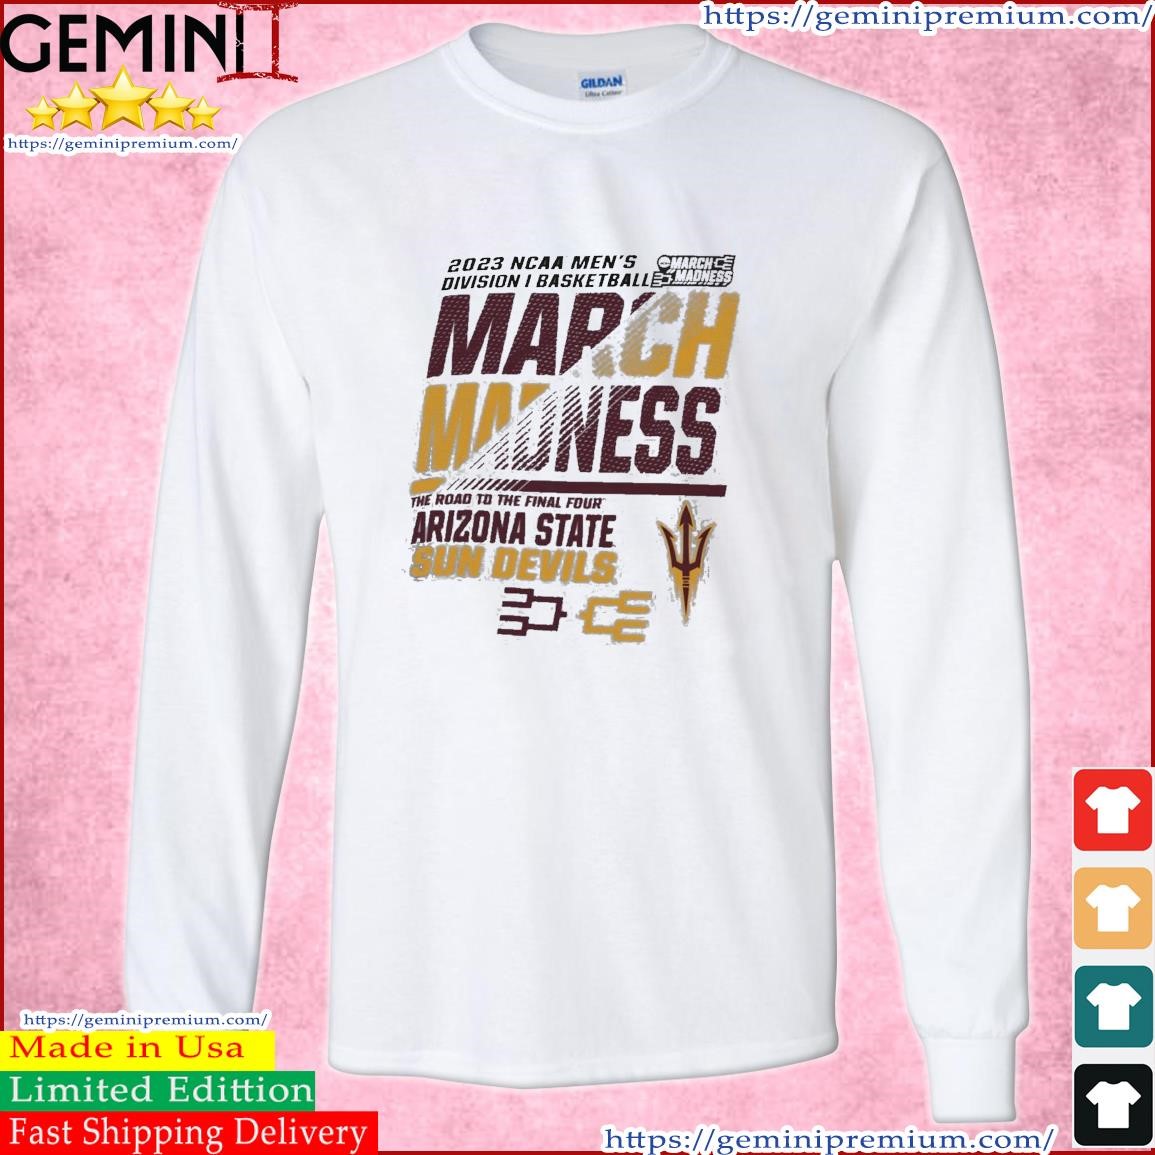 Arizona State Men's Basketball 2023 NCAA March Madness The Road To Final Four Shirt Long Sleeve Tee.jpg